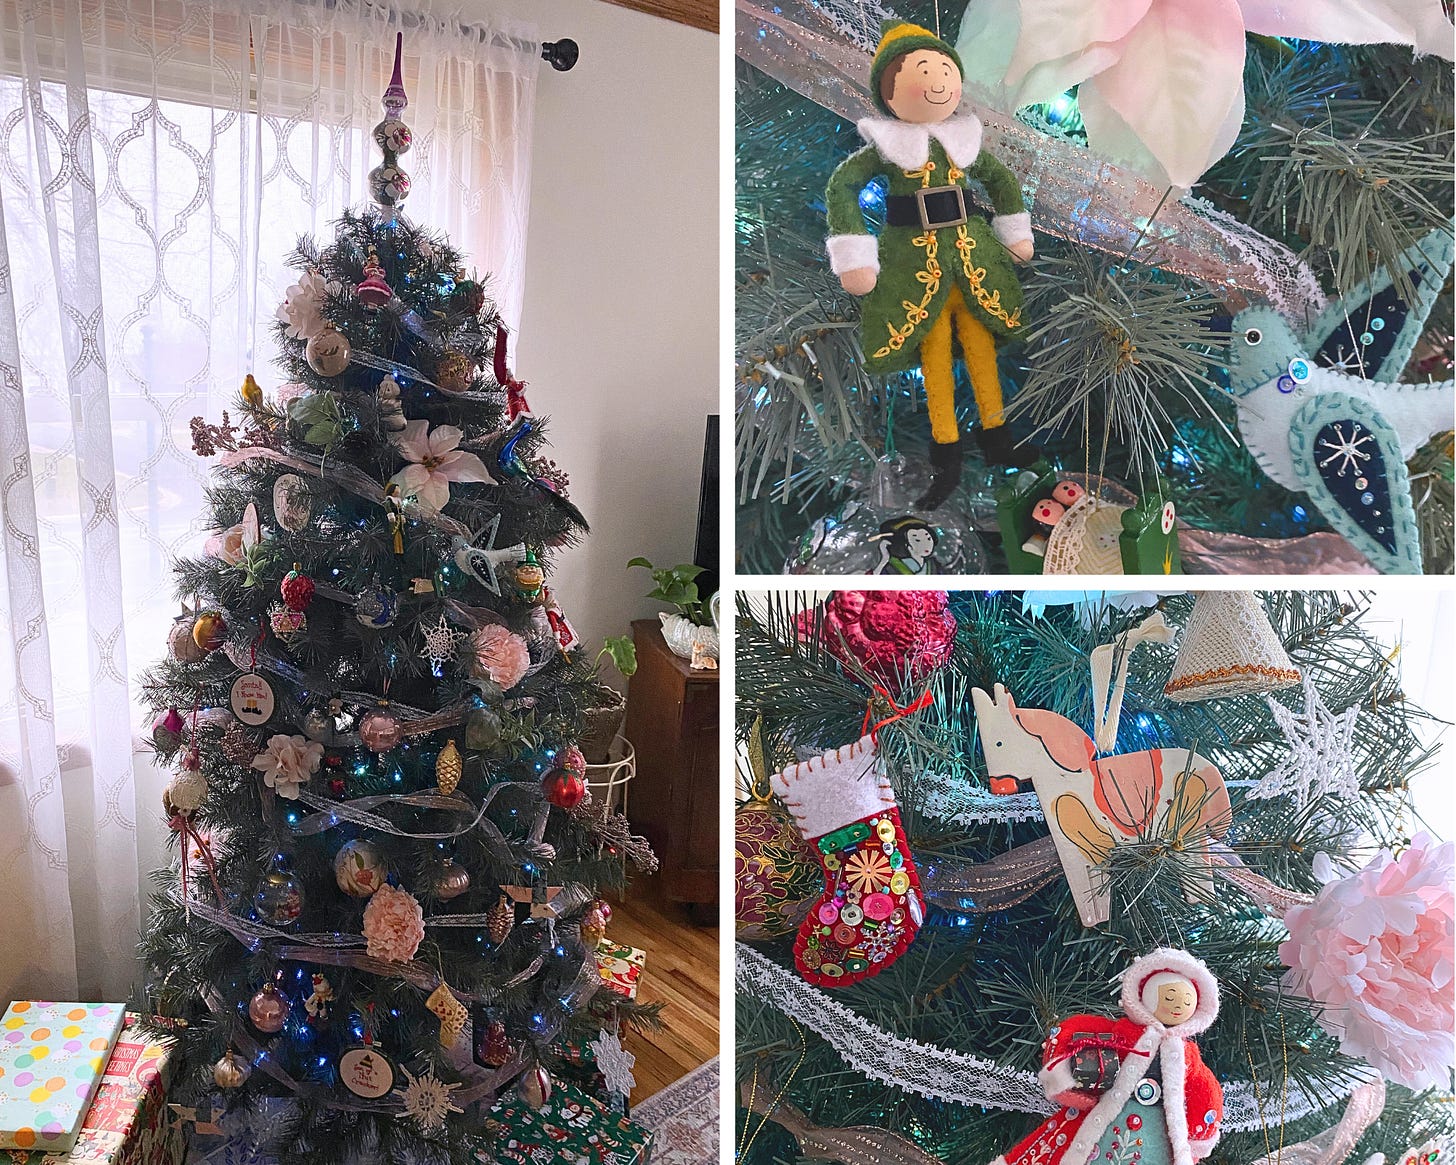 A photo collage of a christmas tree decorate in an assortment of eclectic ornaments and vintage objects.